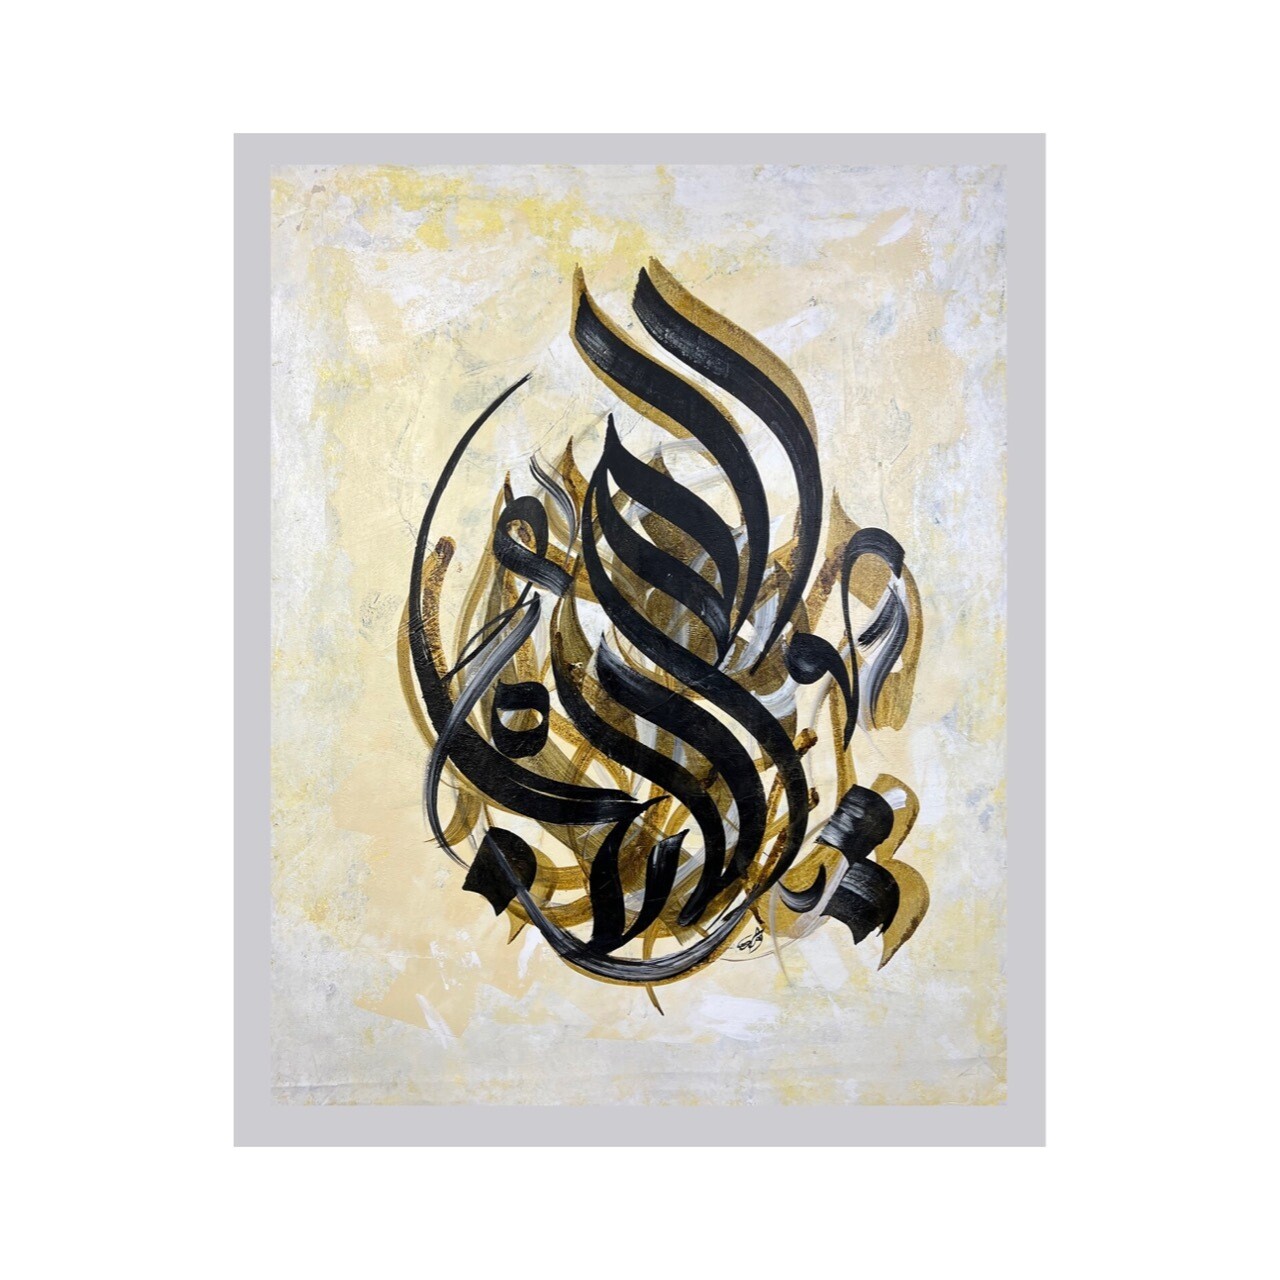 Ar-Rahman  - Names of Allah - Abstract calligraphy oil painting